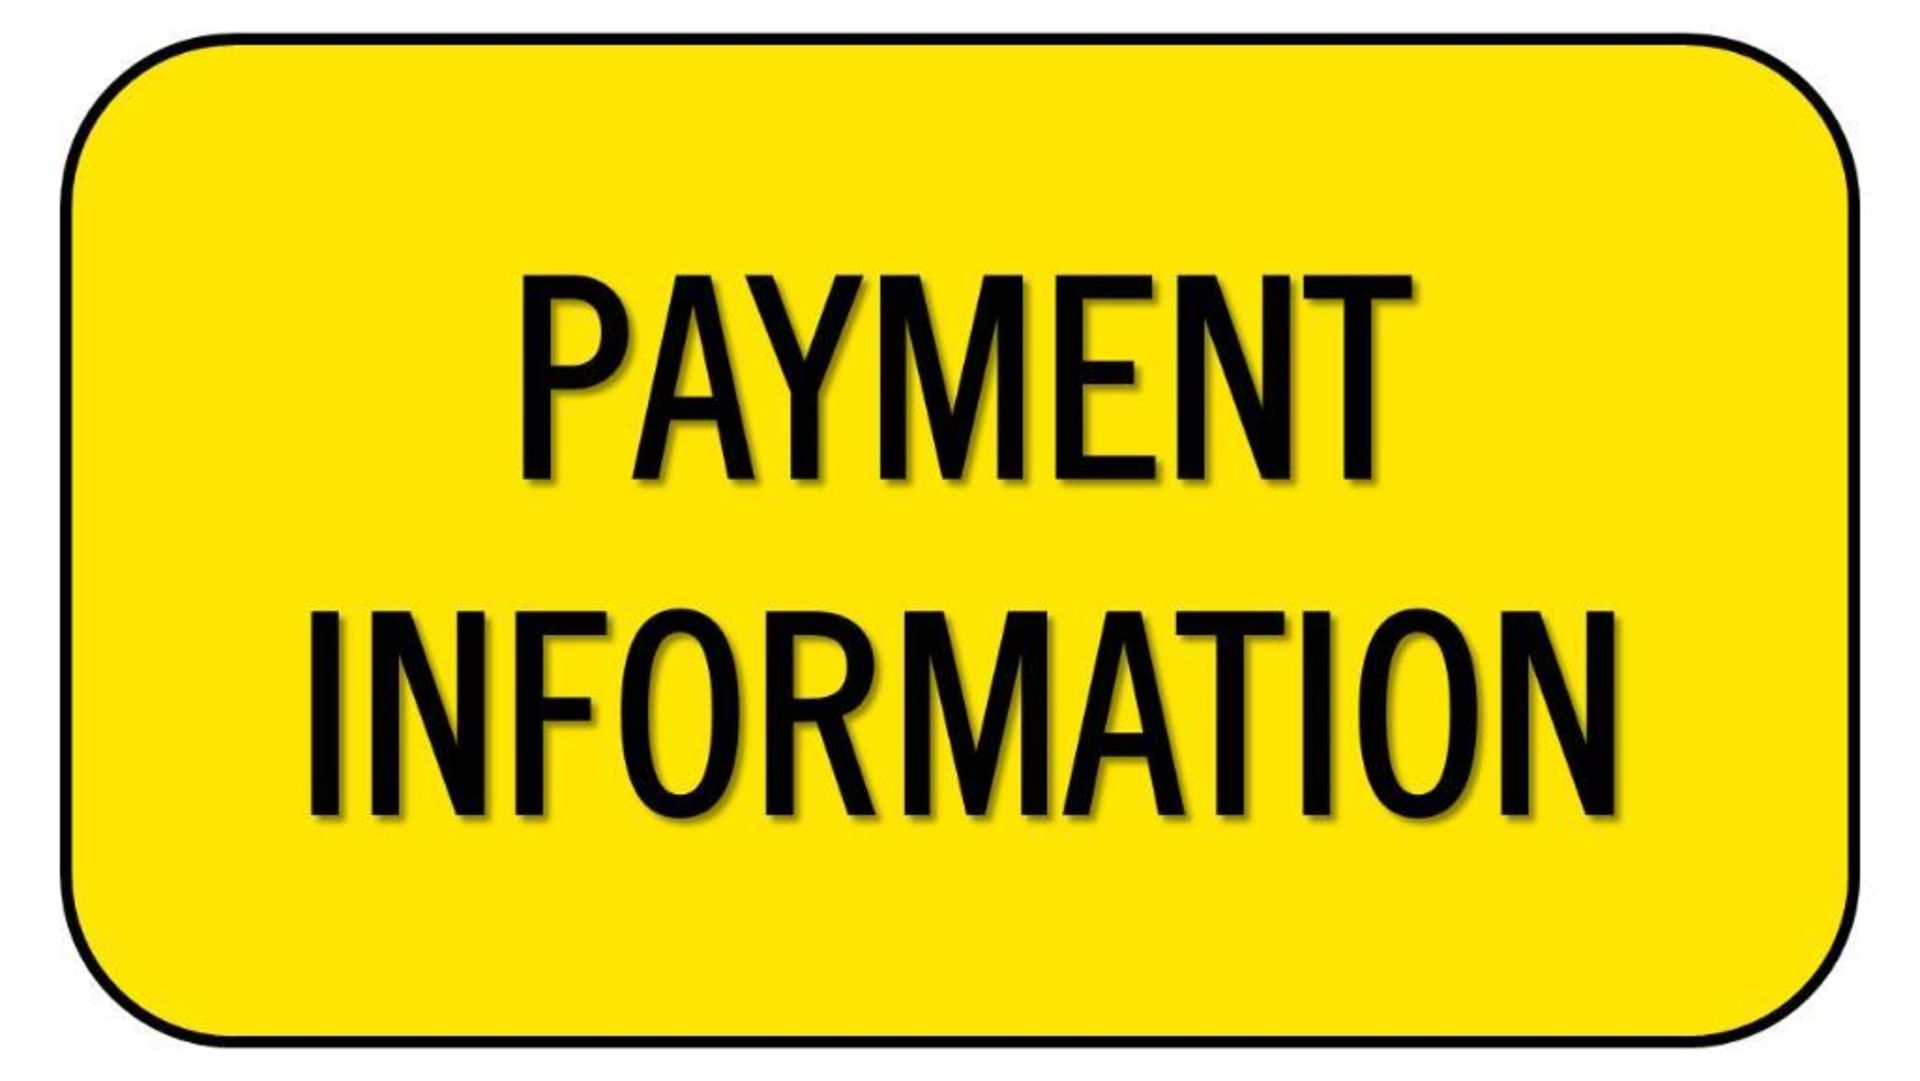 Payment Information - Image 2 of 2